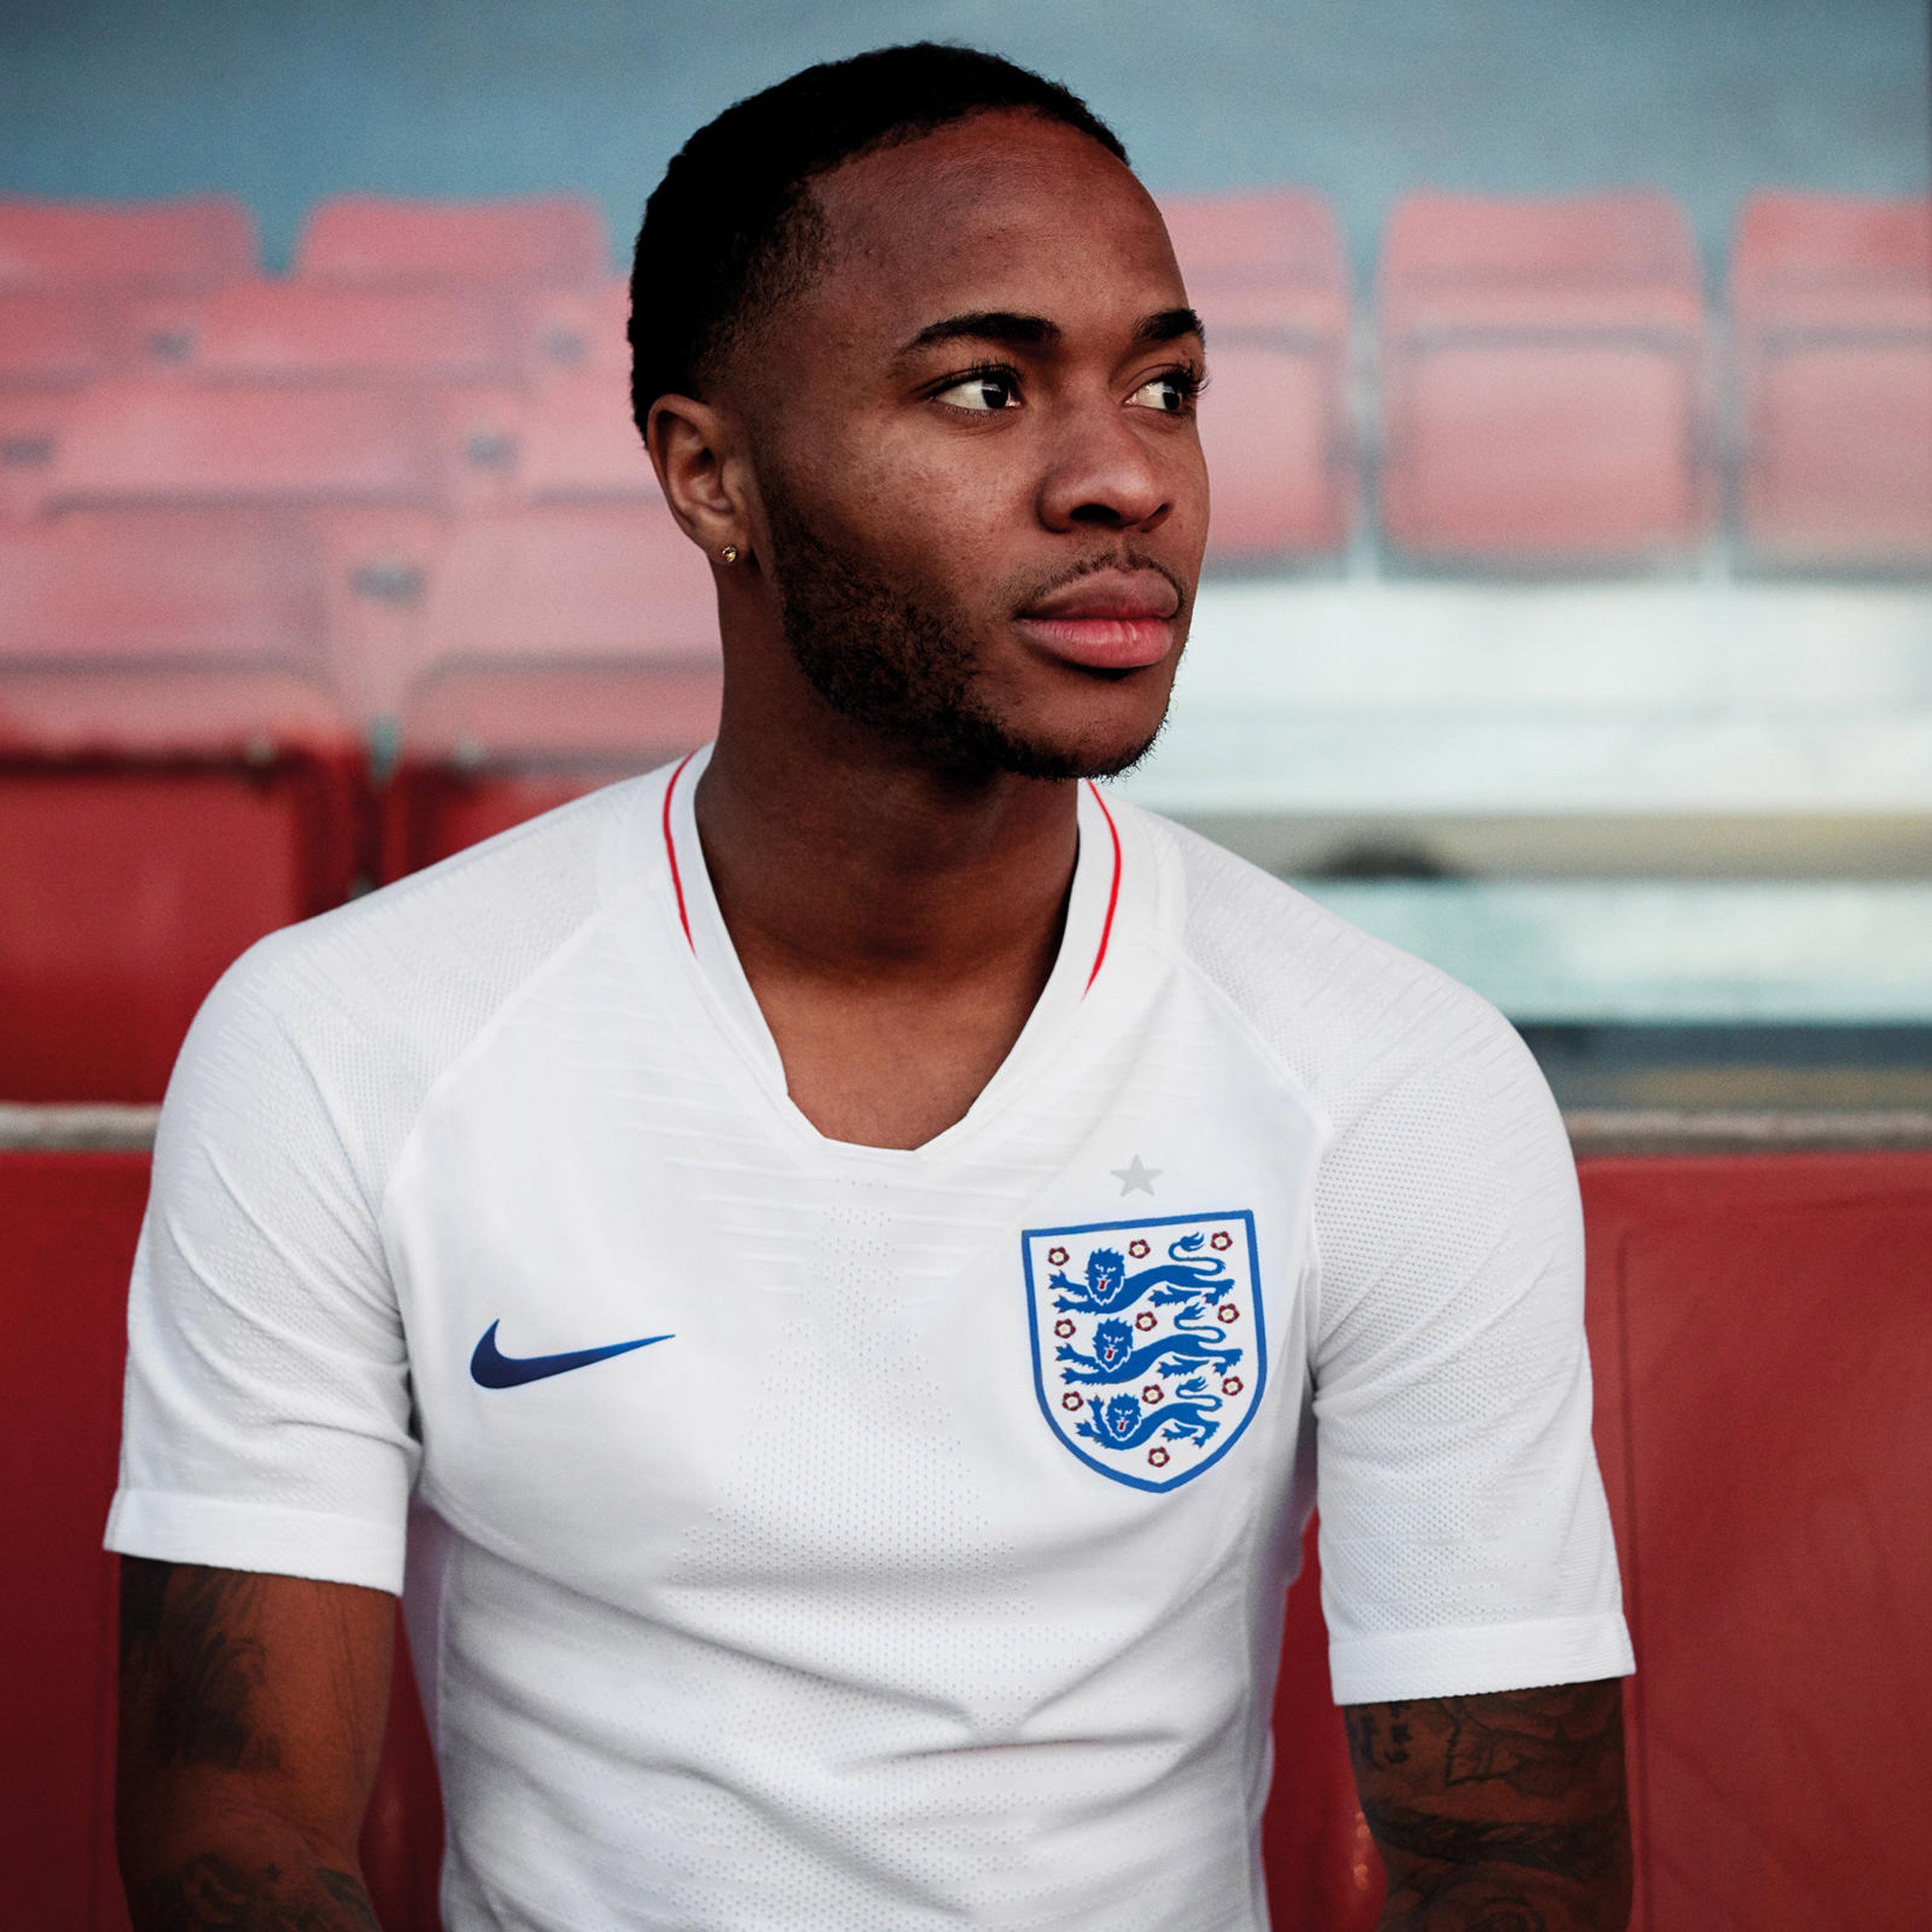 Great Barrier Reef in stand houden schoner Nike unveils World Cup 2018 kits for England and Nigeria